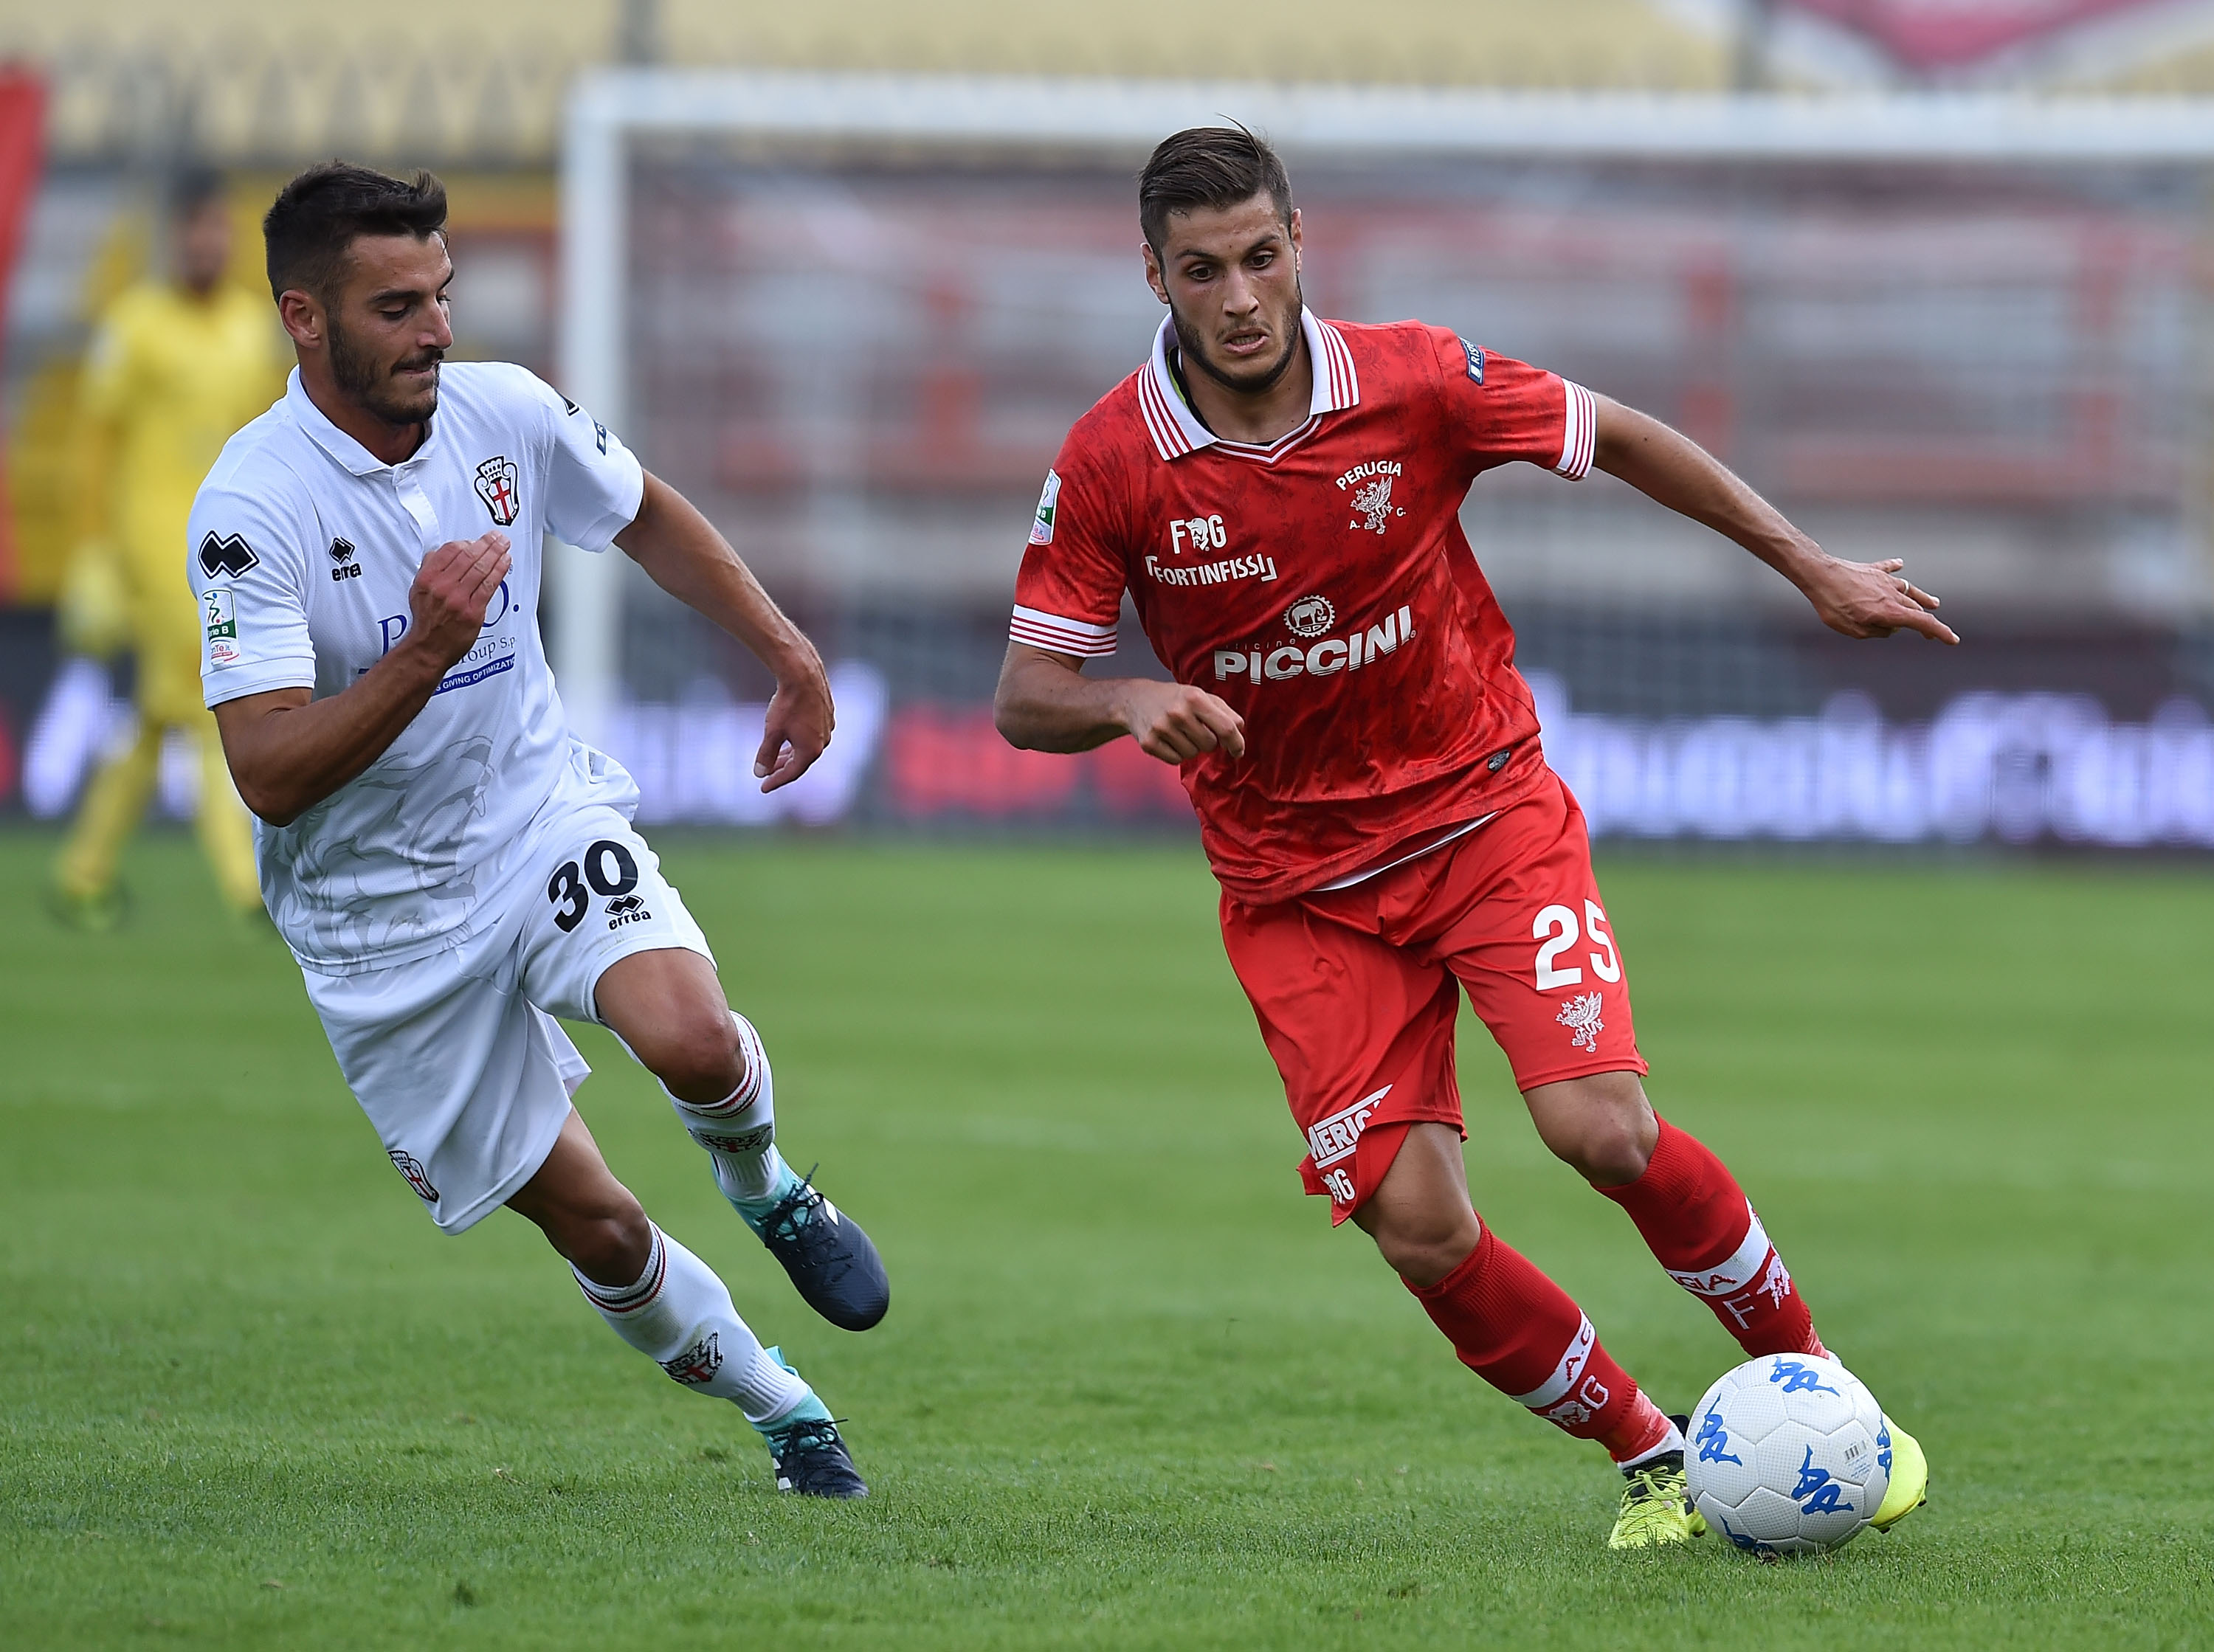 PERUGIA, ITALY - OCTOBER 08: Giuseppe Vives of Pro Vercelli and Filippo Falco of AC Perugia in action during the Serie B match between AC Perugia and Pro Vercelli at Stadio Renato Curi on October 8, 2017 in Perugia, Italy.  (Photo by Giuseppe Bellini/Getty Images)